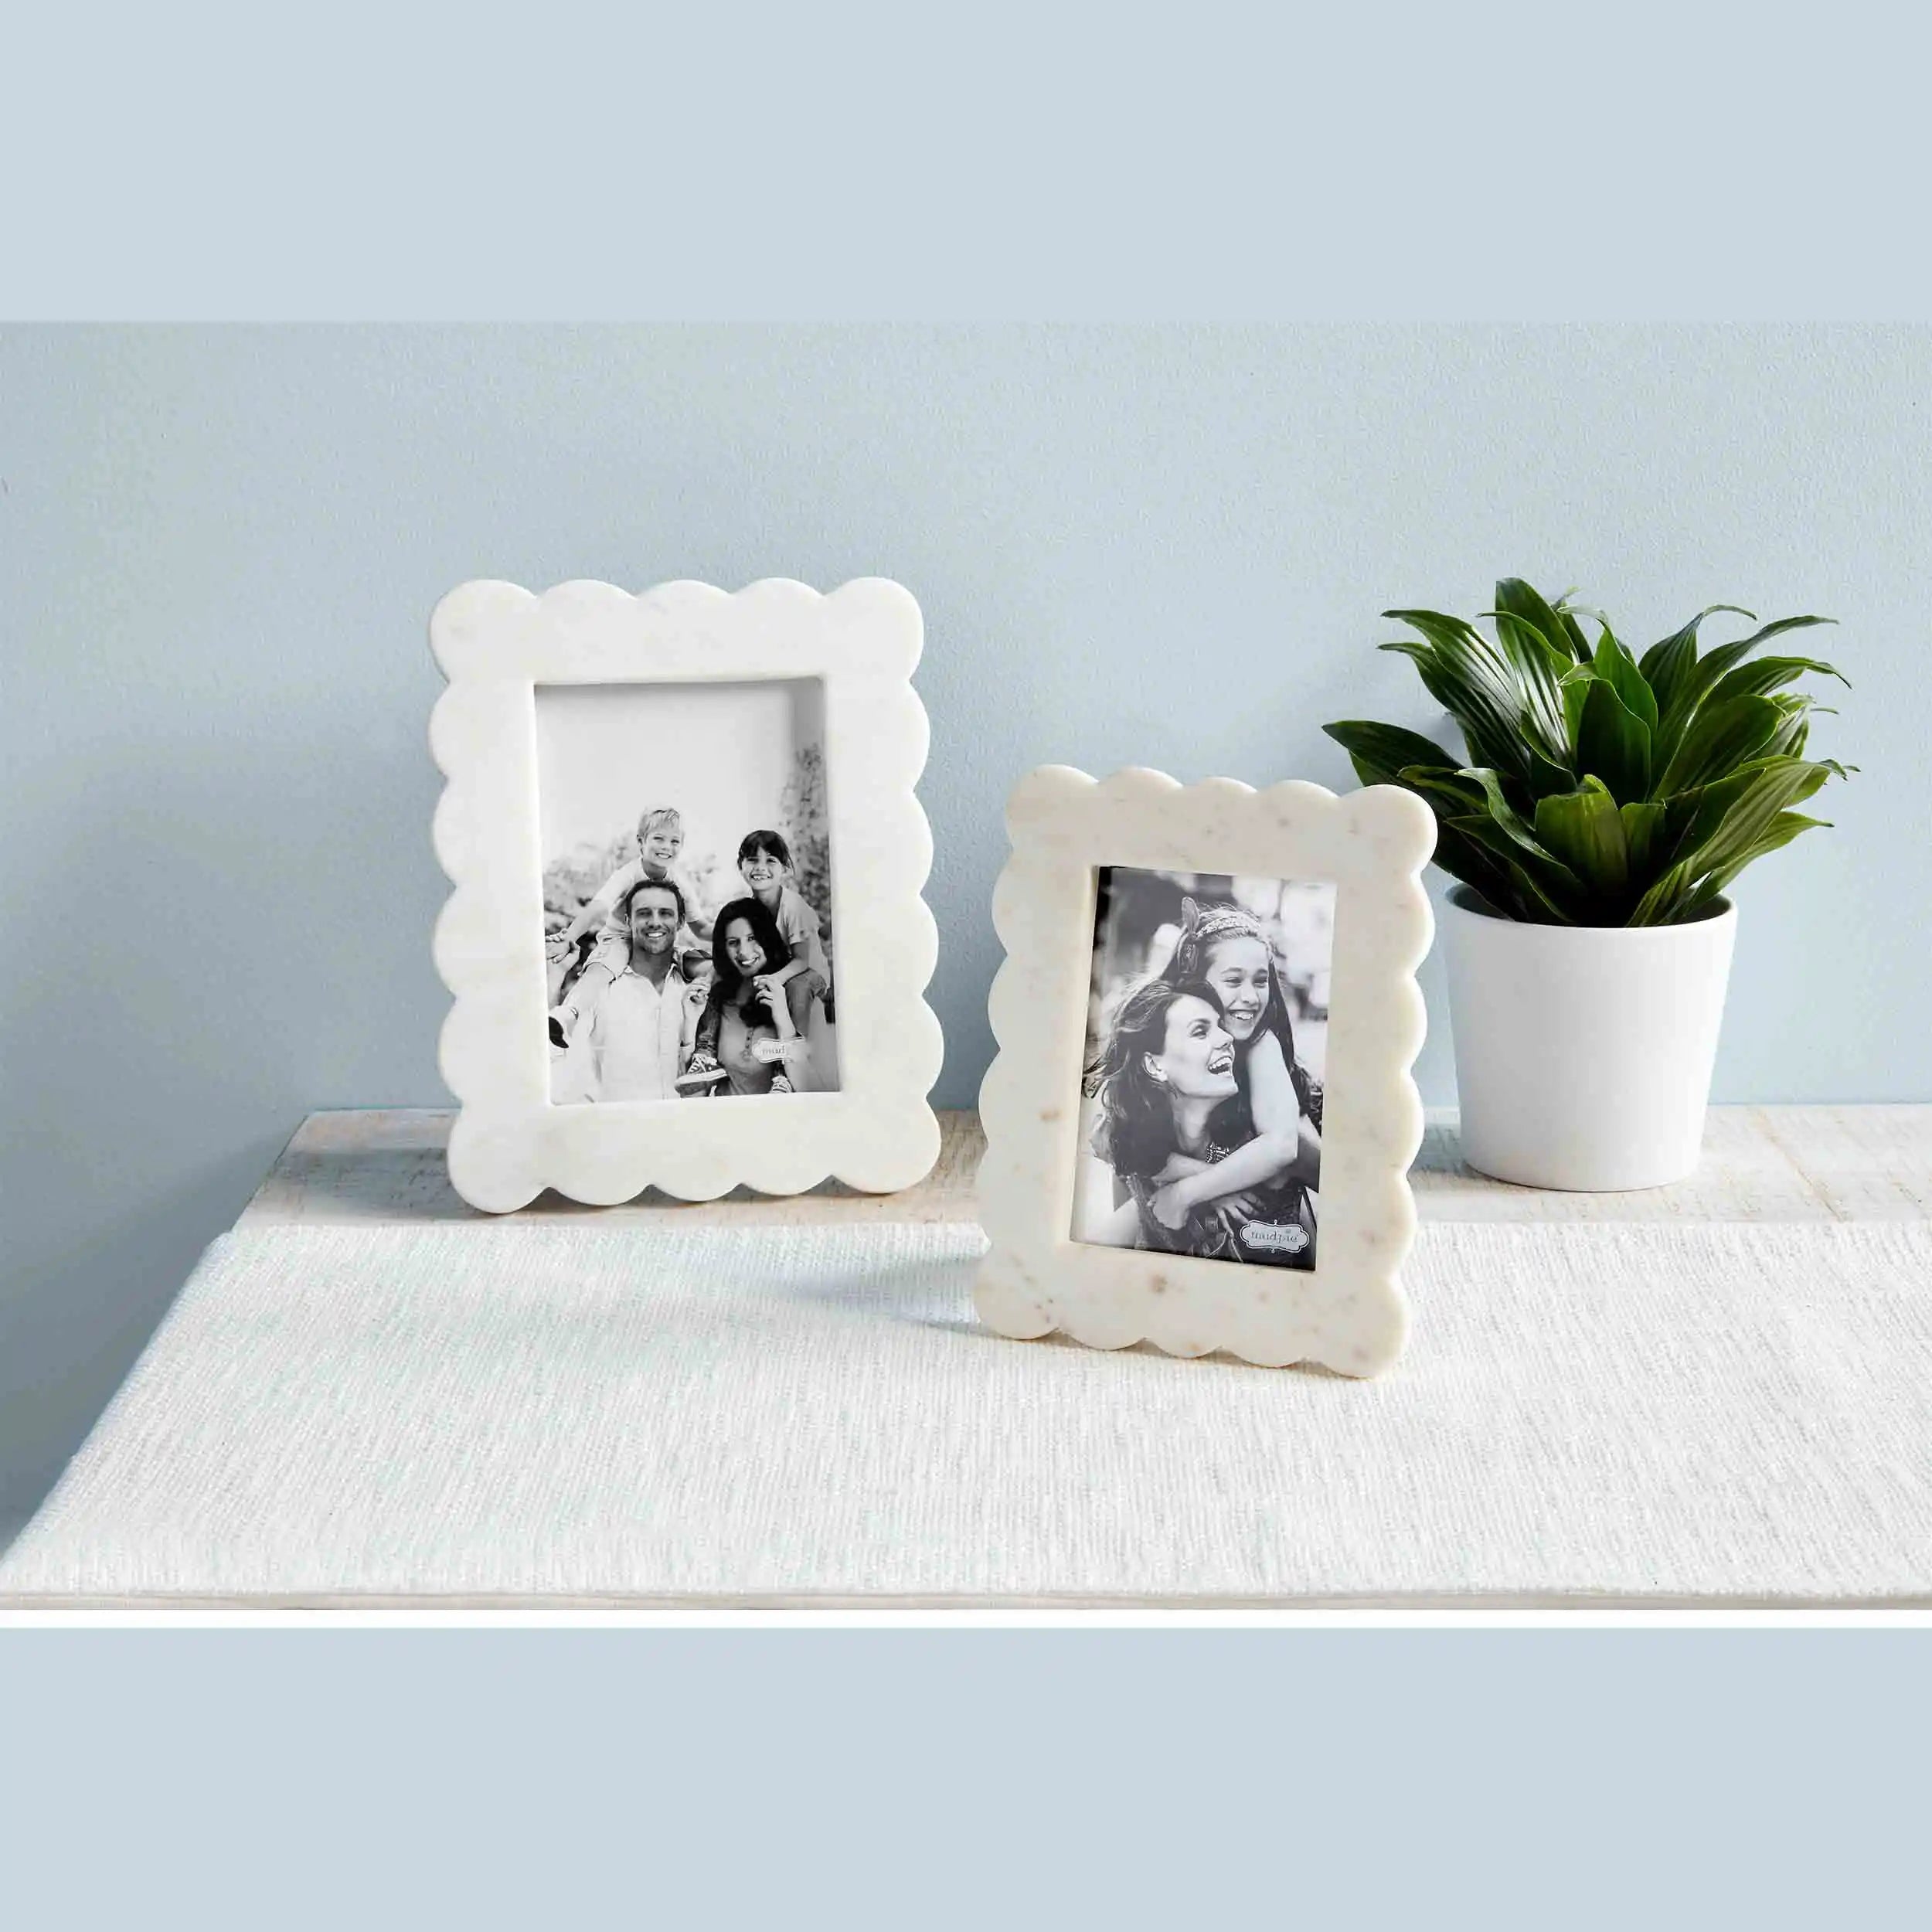 Scalloped Marble Picture Frame - 4x6